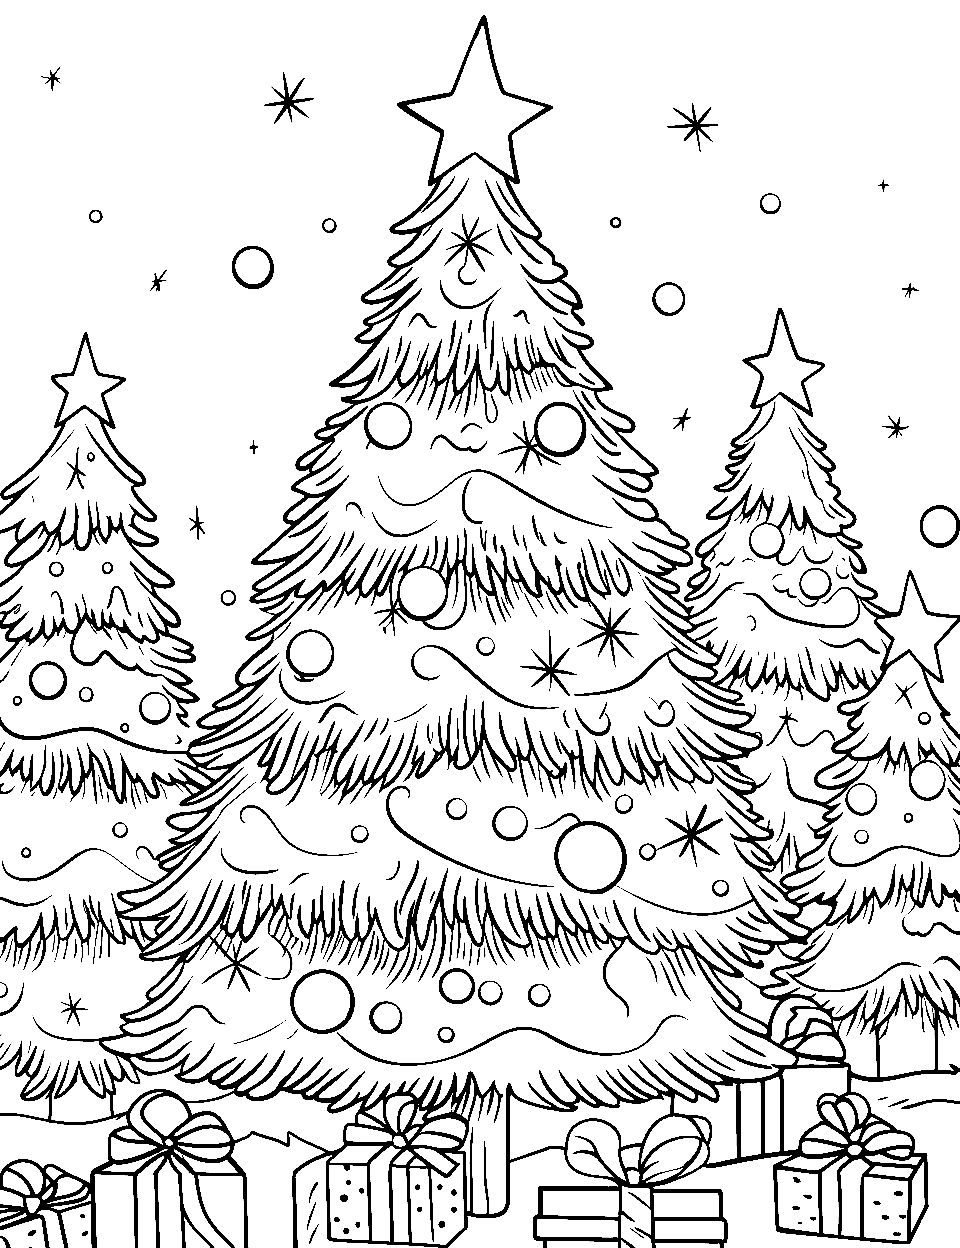 Large Detailed Christmas Scene Coloring Page - A detailed scene featuring large, decorated Christmas trees with snow gently falling in the background.